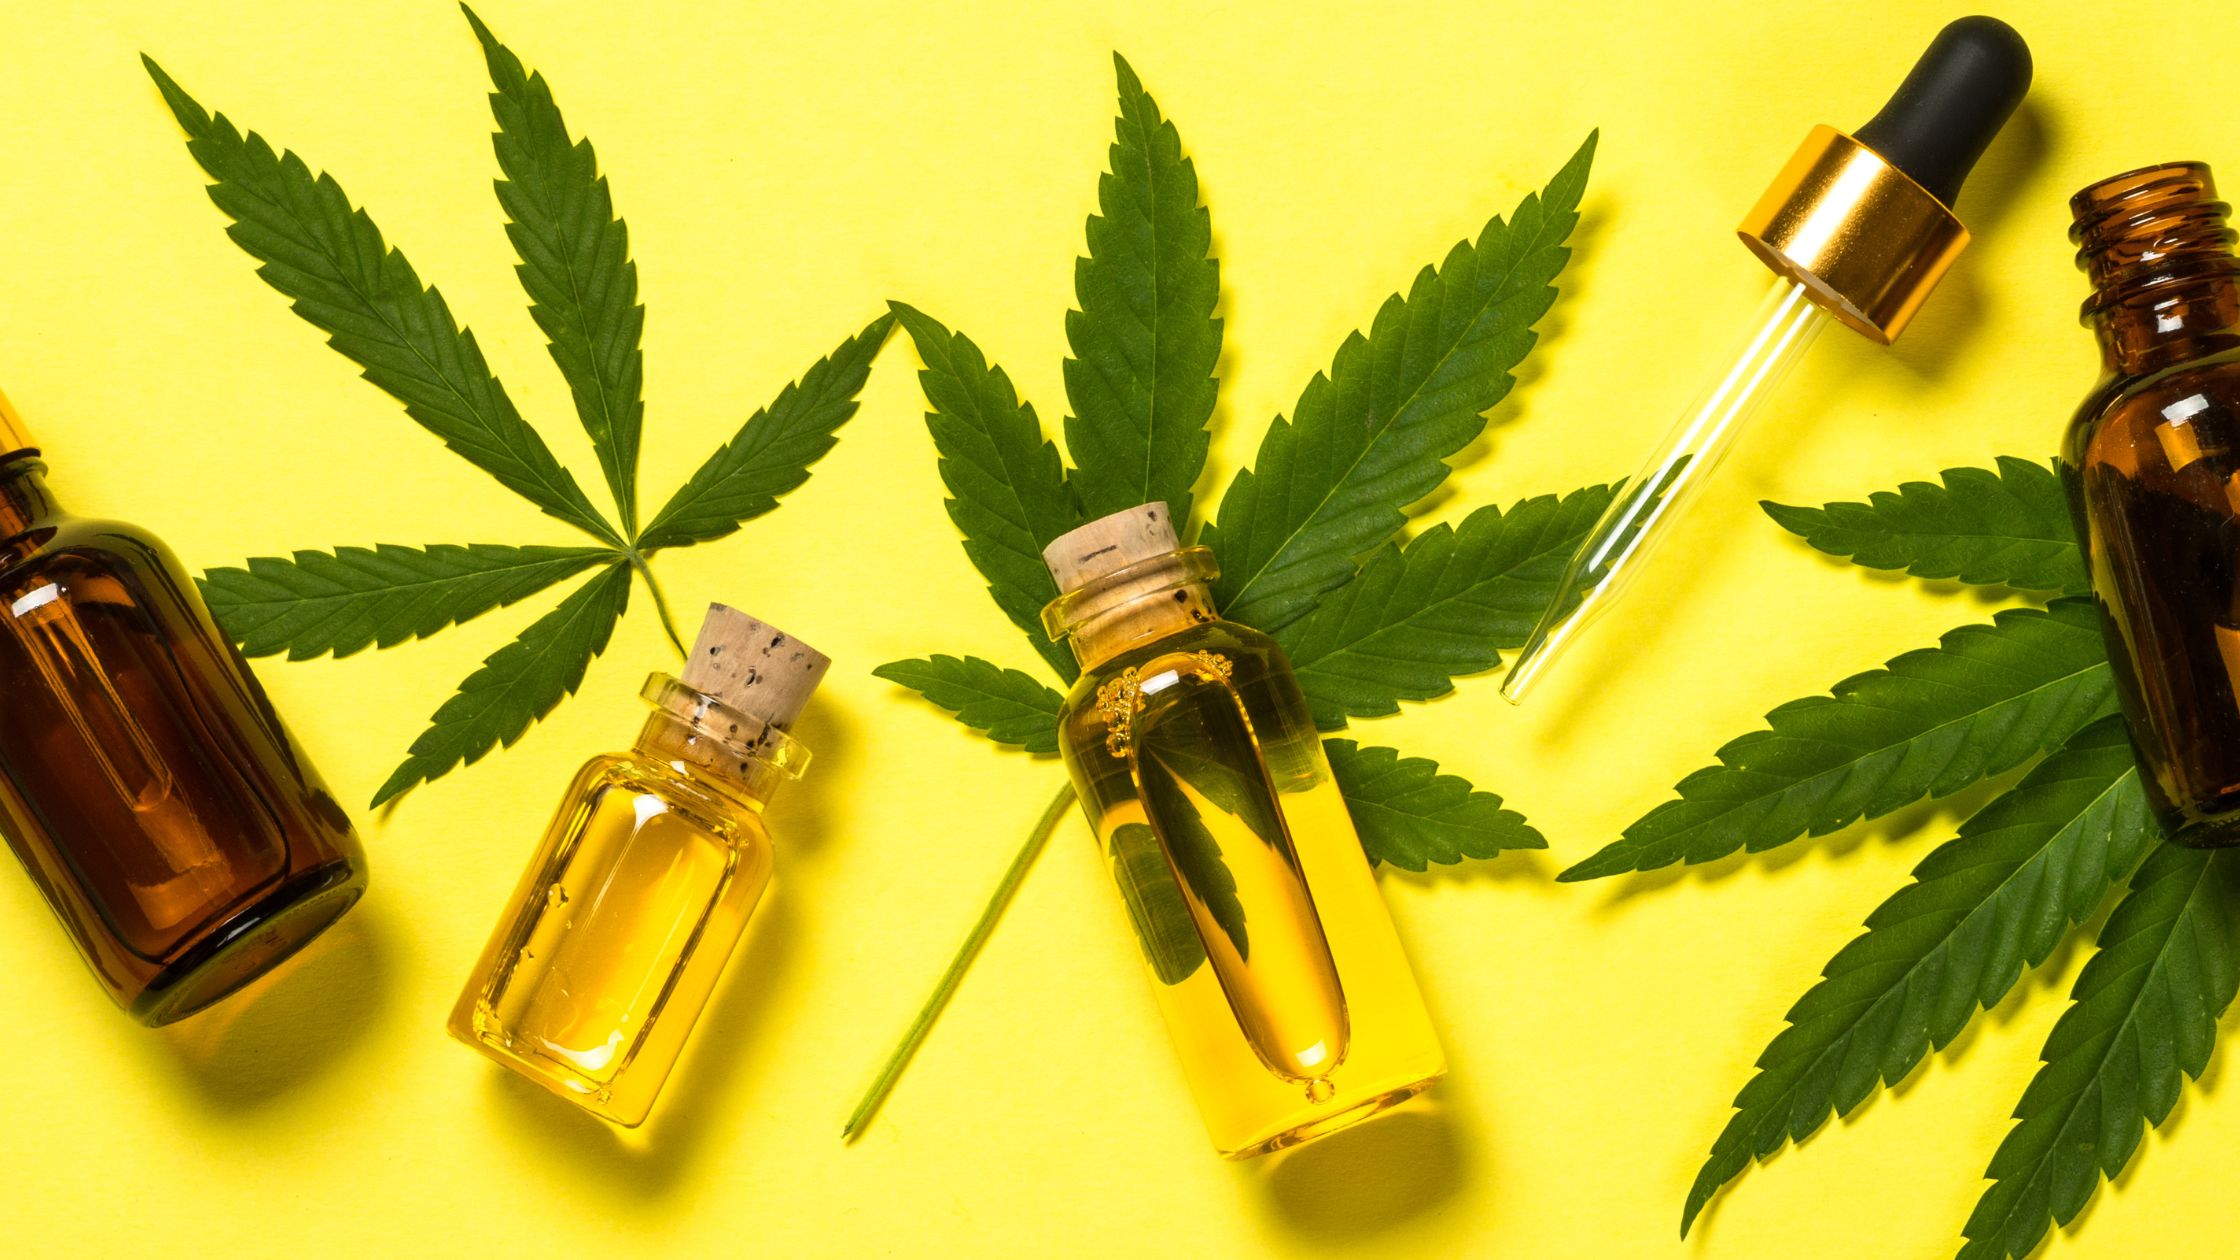 You are currently viewing The Best Guide on Cannabis Tinctures, Oils, and Concentrates.